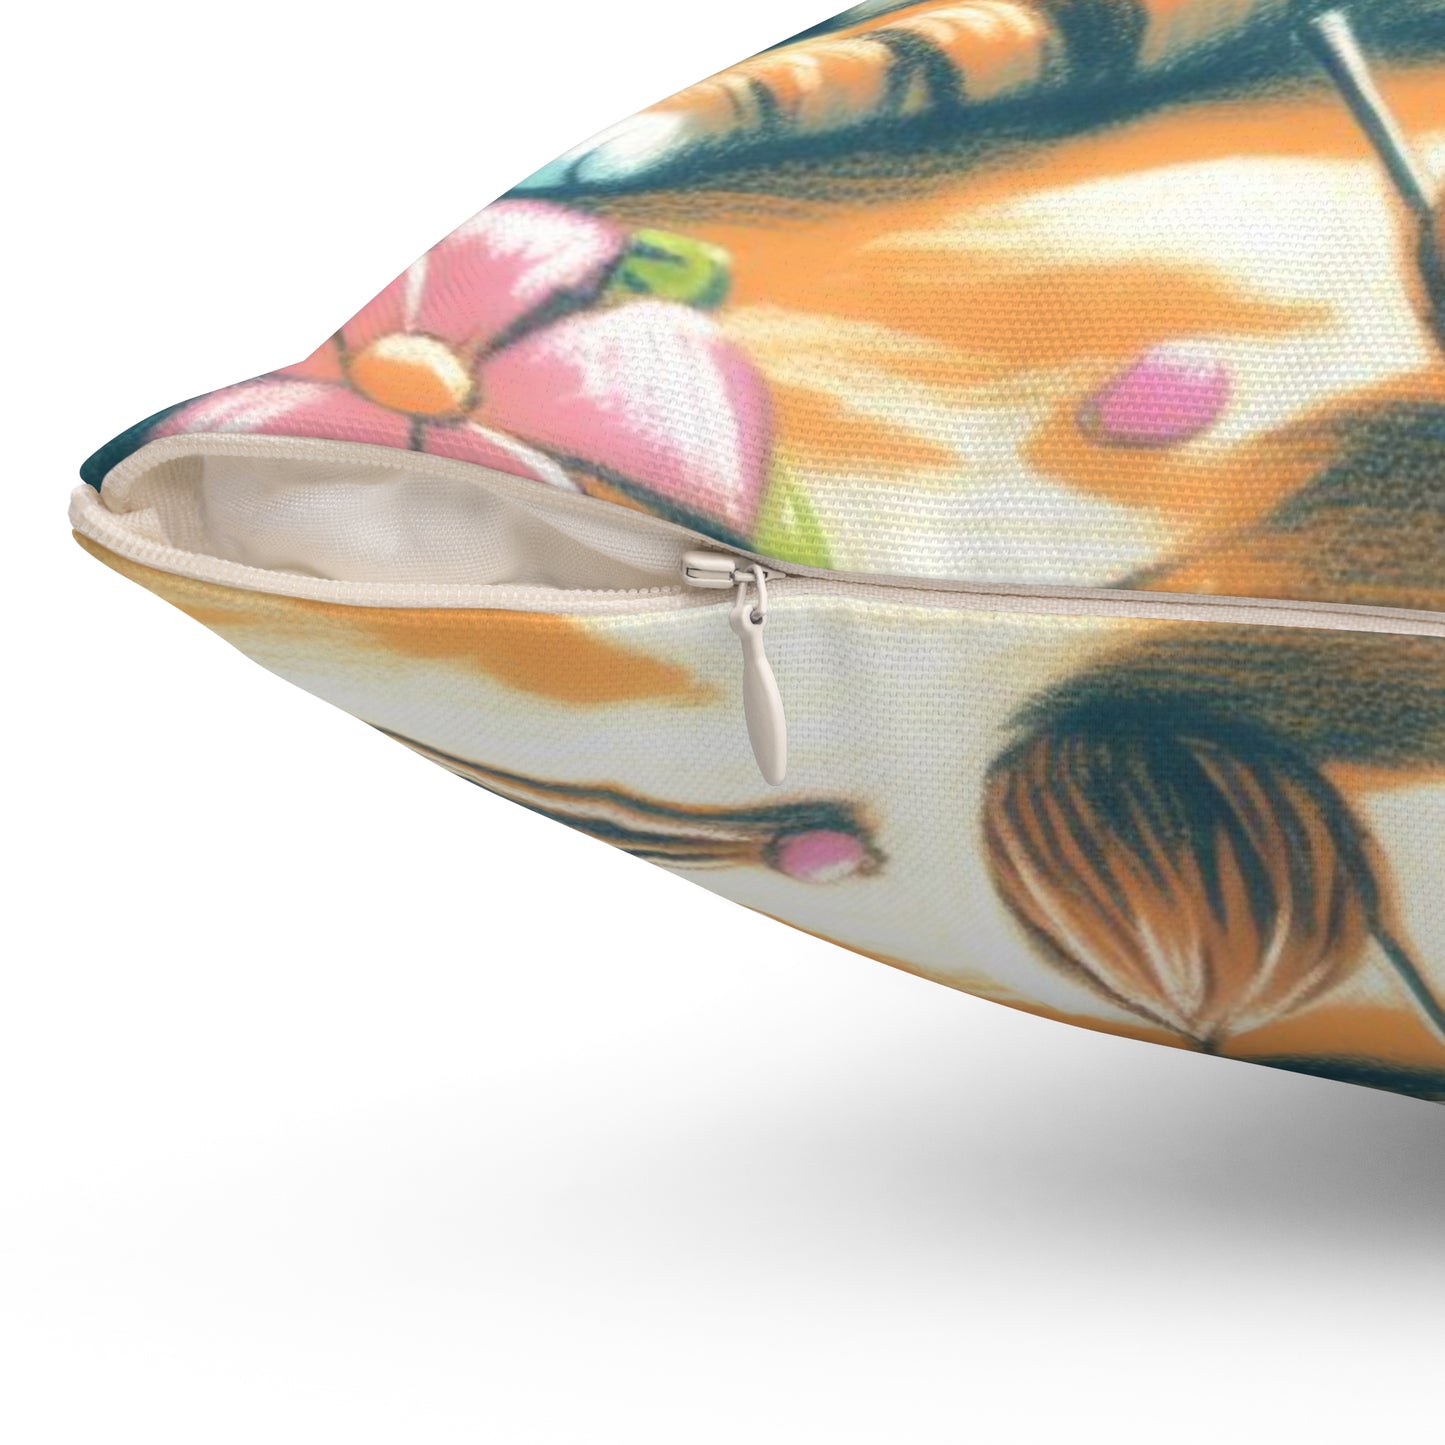 Tropical Kitty Beach Pillow: Sunny Day Serenity for Cat Lovers